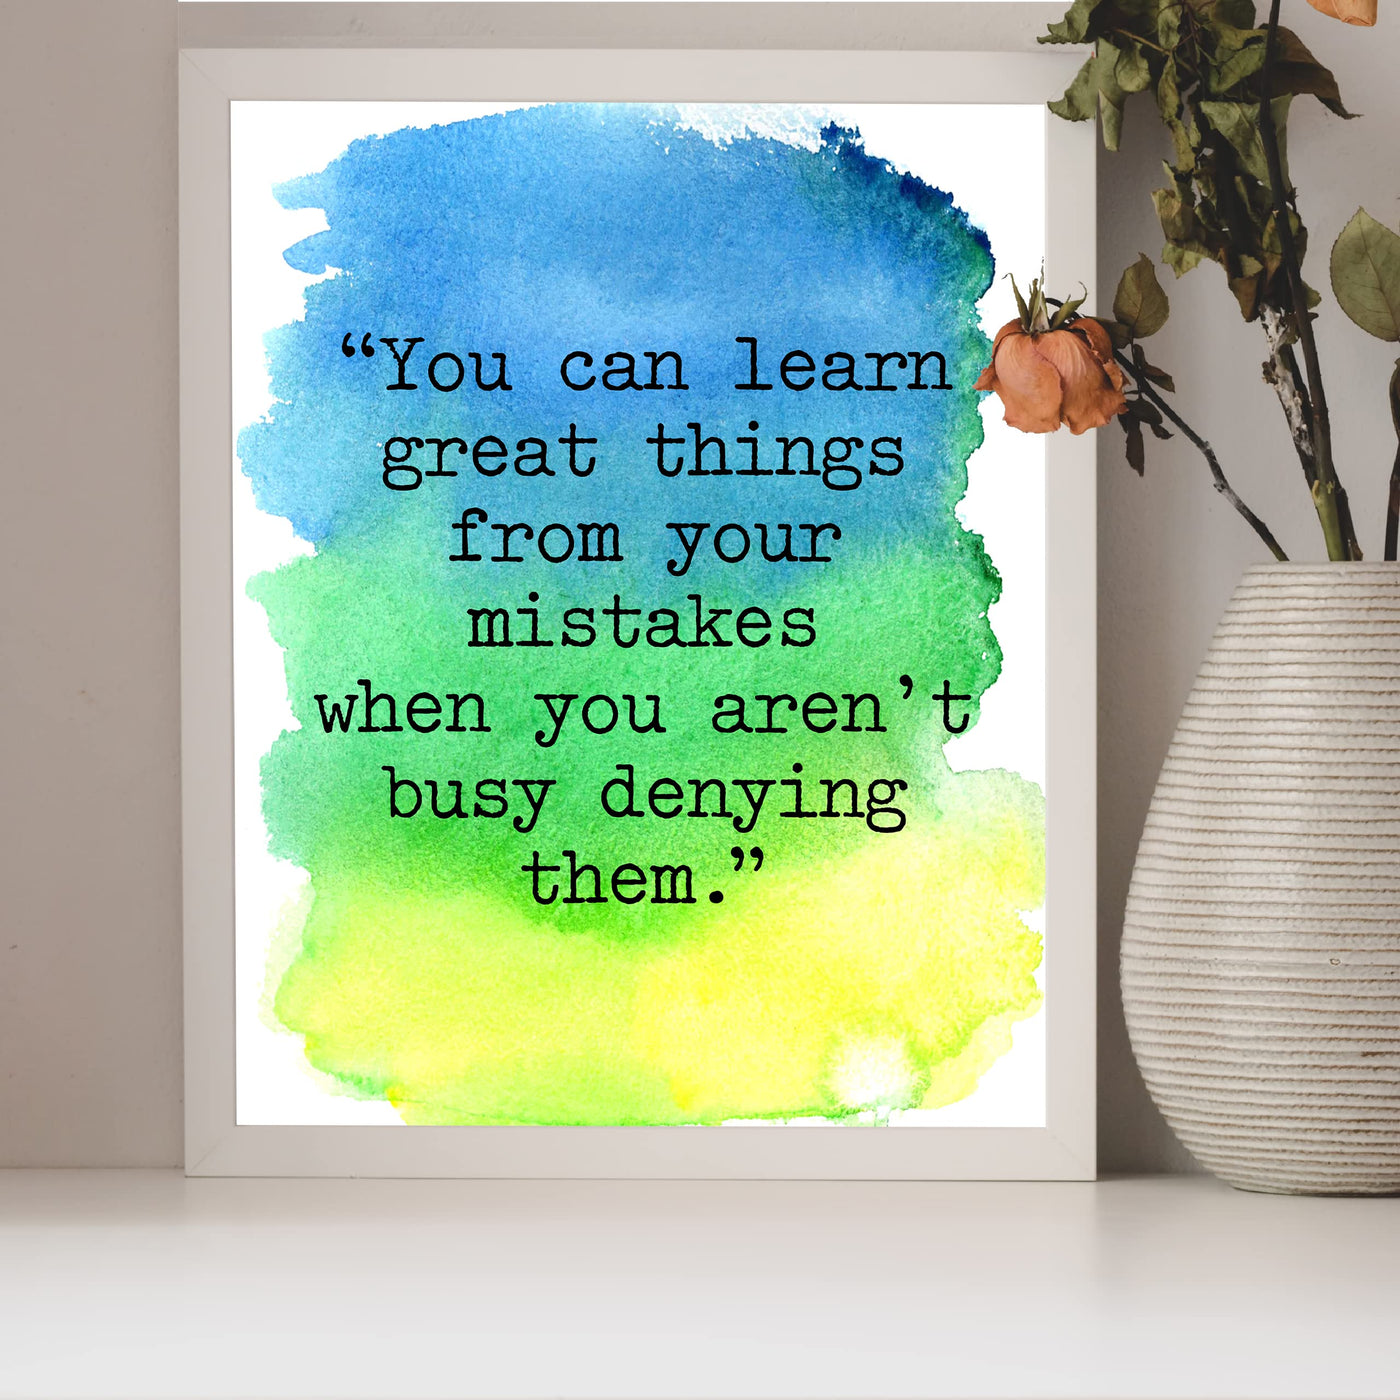 You Can Learn Great Things From Your Mistakes Motivational Wall Art Decor -8 x 10" Inspirational Typography Print -Ready to Frame. Perfect Decoration for Home-Office-Work. Great Gift of Motivation!